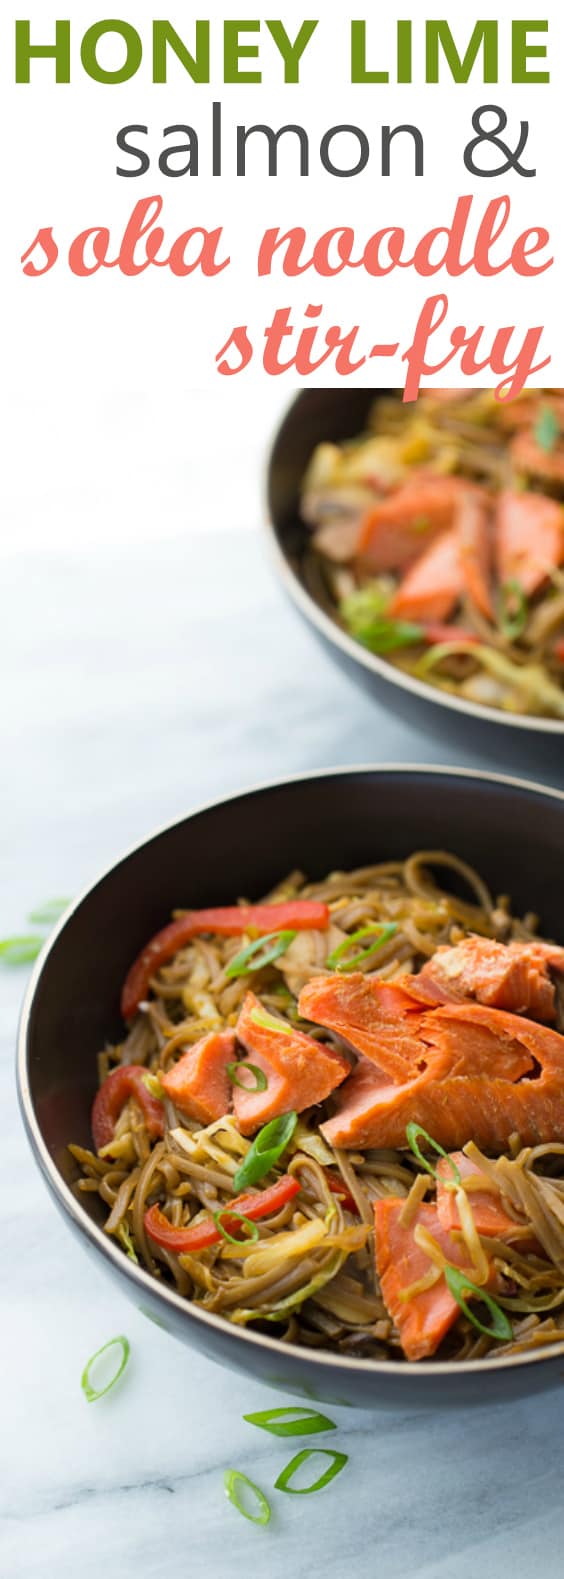 Honey Lime Salmon with Soba Noodle Stir-Fry! A healthy, light and flavorful meal that will leave you feeling great. Gluten/Dairy-Free!